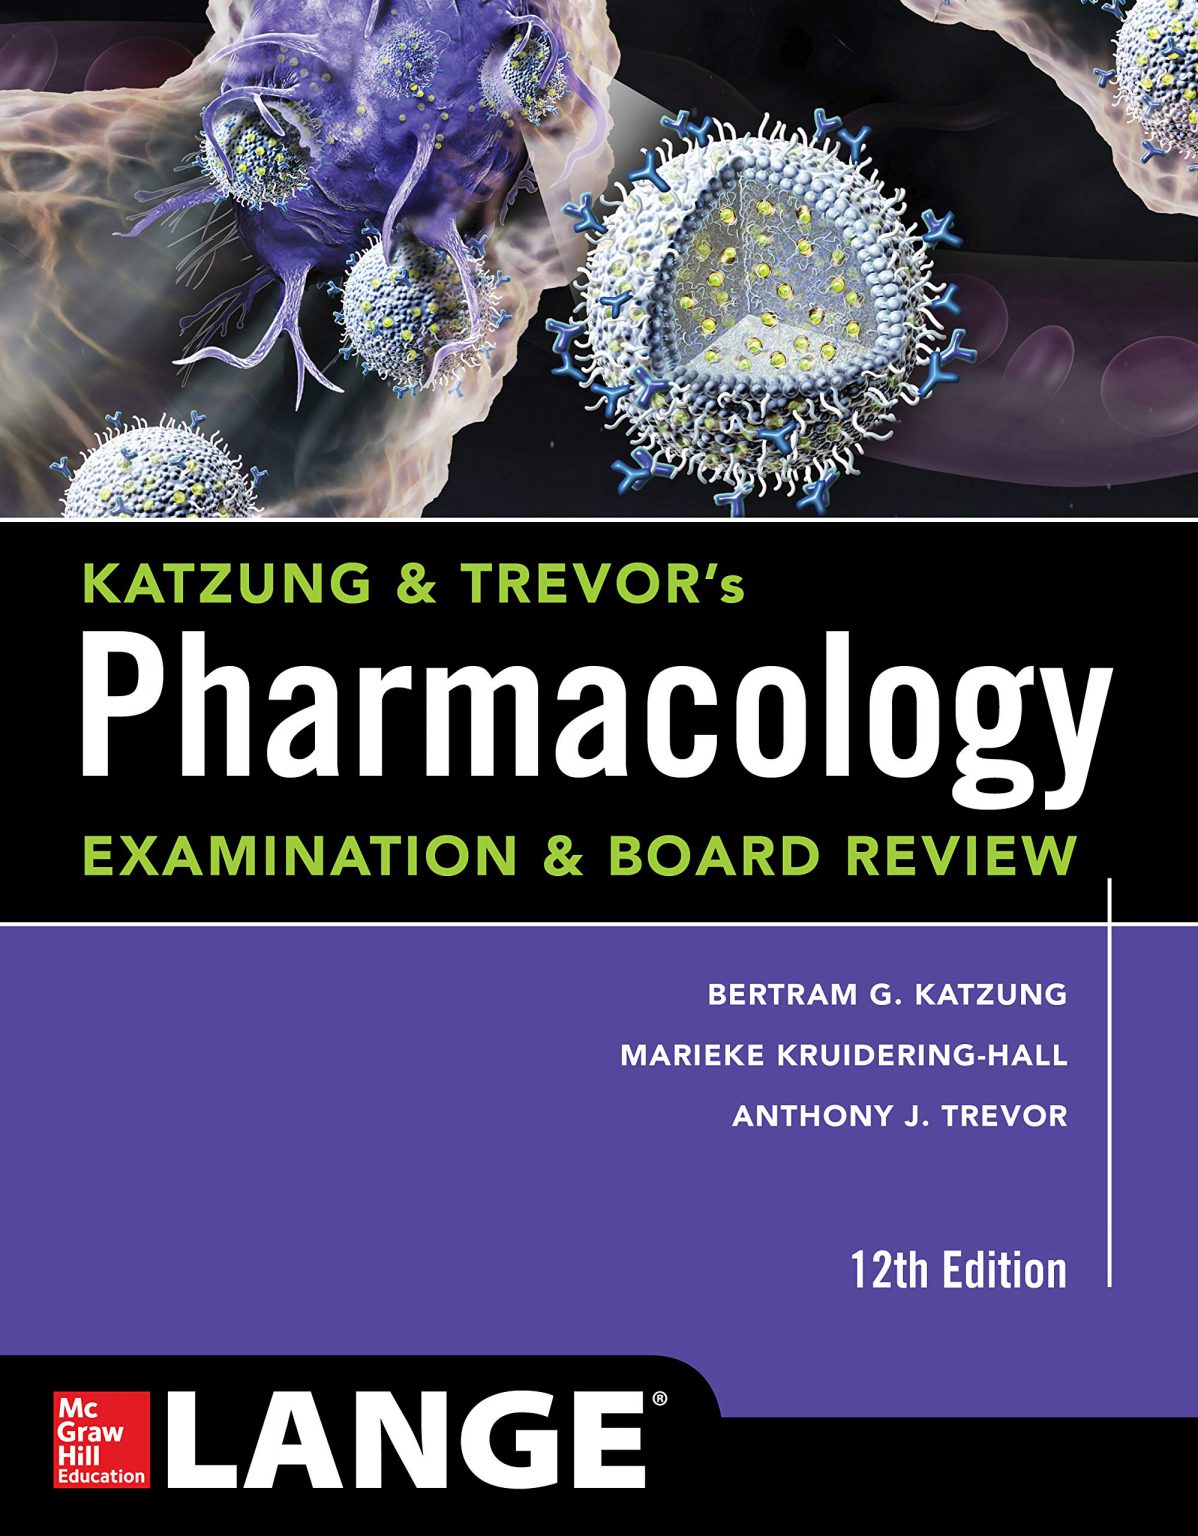 Katzung & Trevor's Pharmacology Examination and Board Review 2019